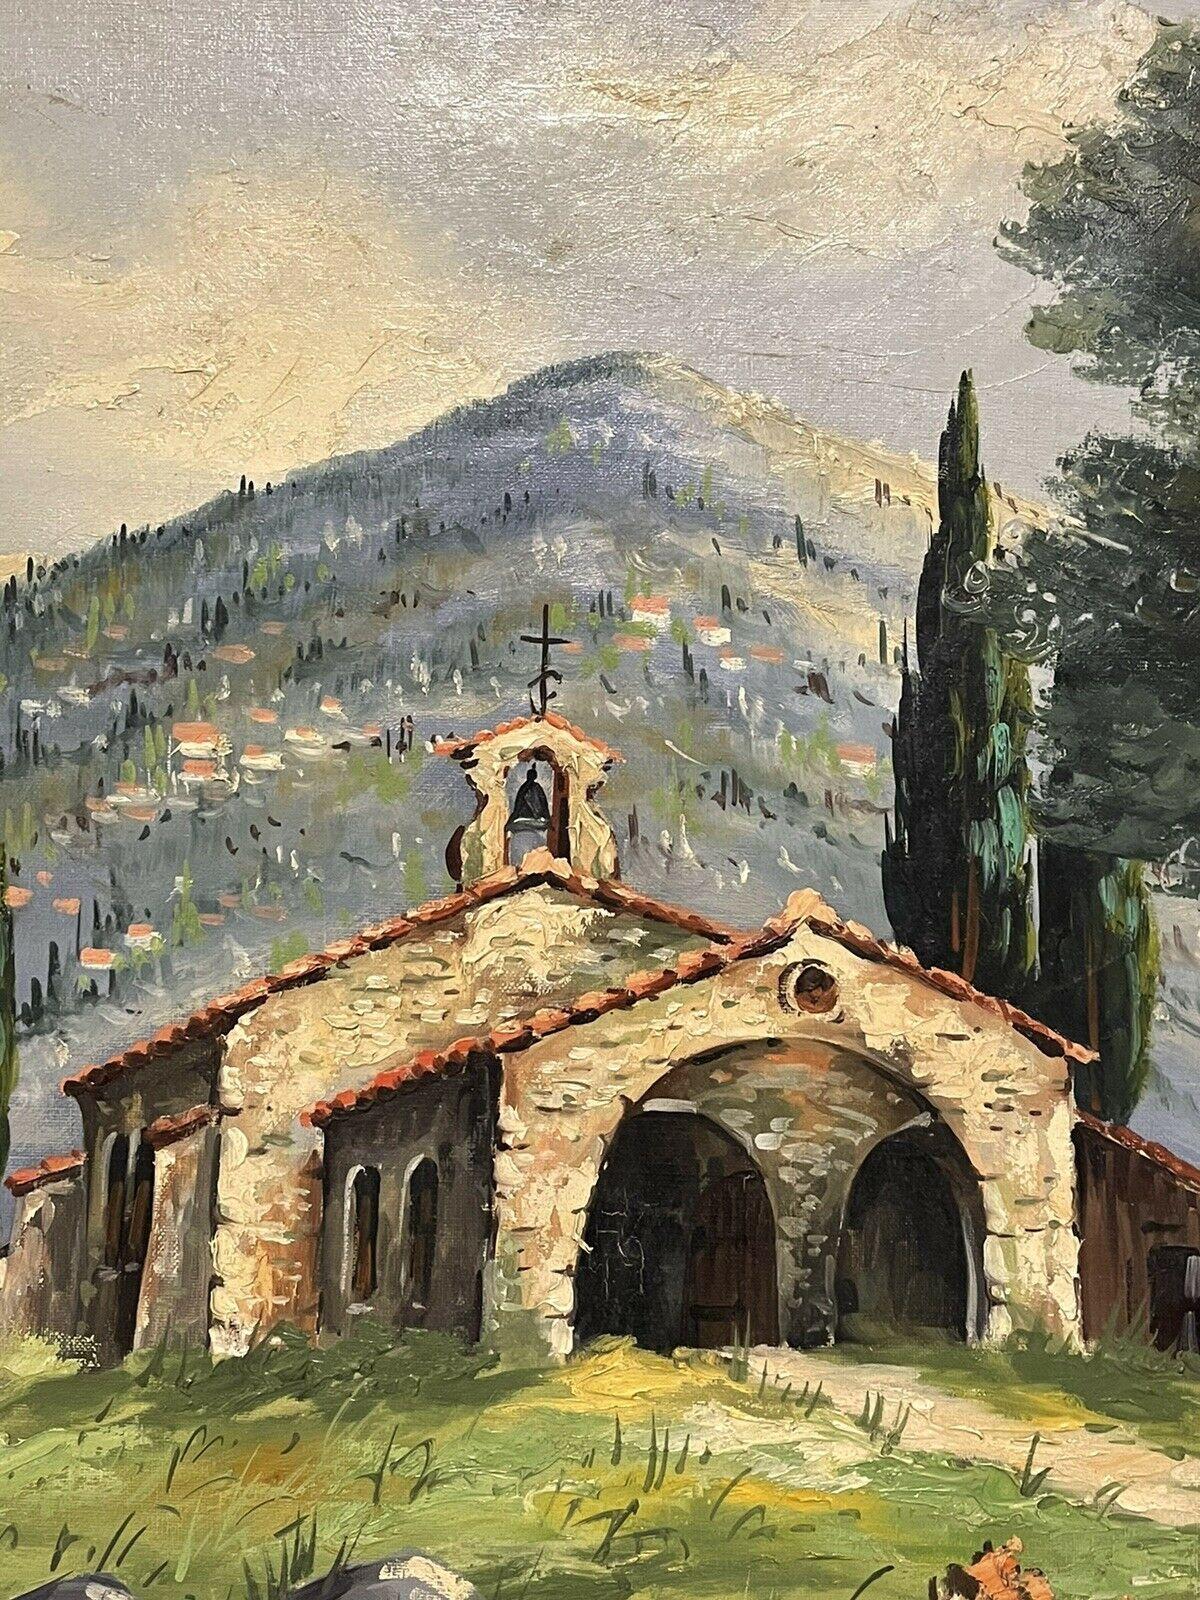 Artist/ School: French School, mid 20th century, indistinctly signed

Title: Provencal Landscape

Medium: oil painting on canvas, framed

Size:  painting: 25 x 36.25 inches,  frame: 27 x 37.75 inches

Provenance: private collection,